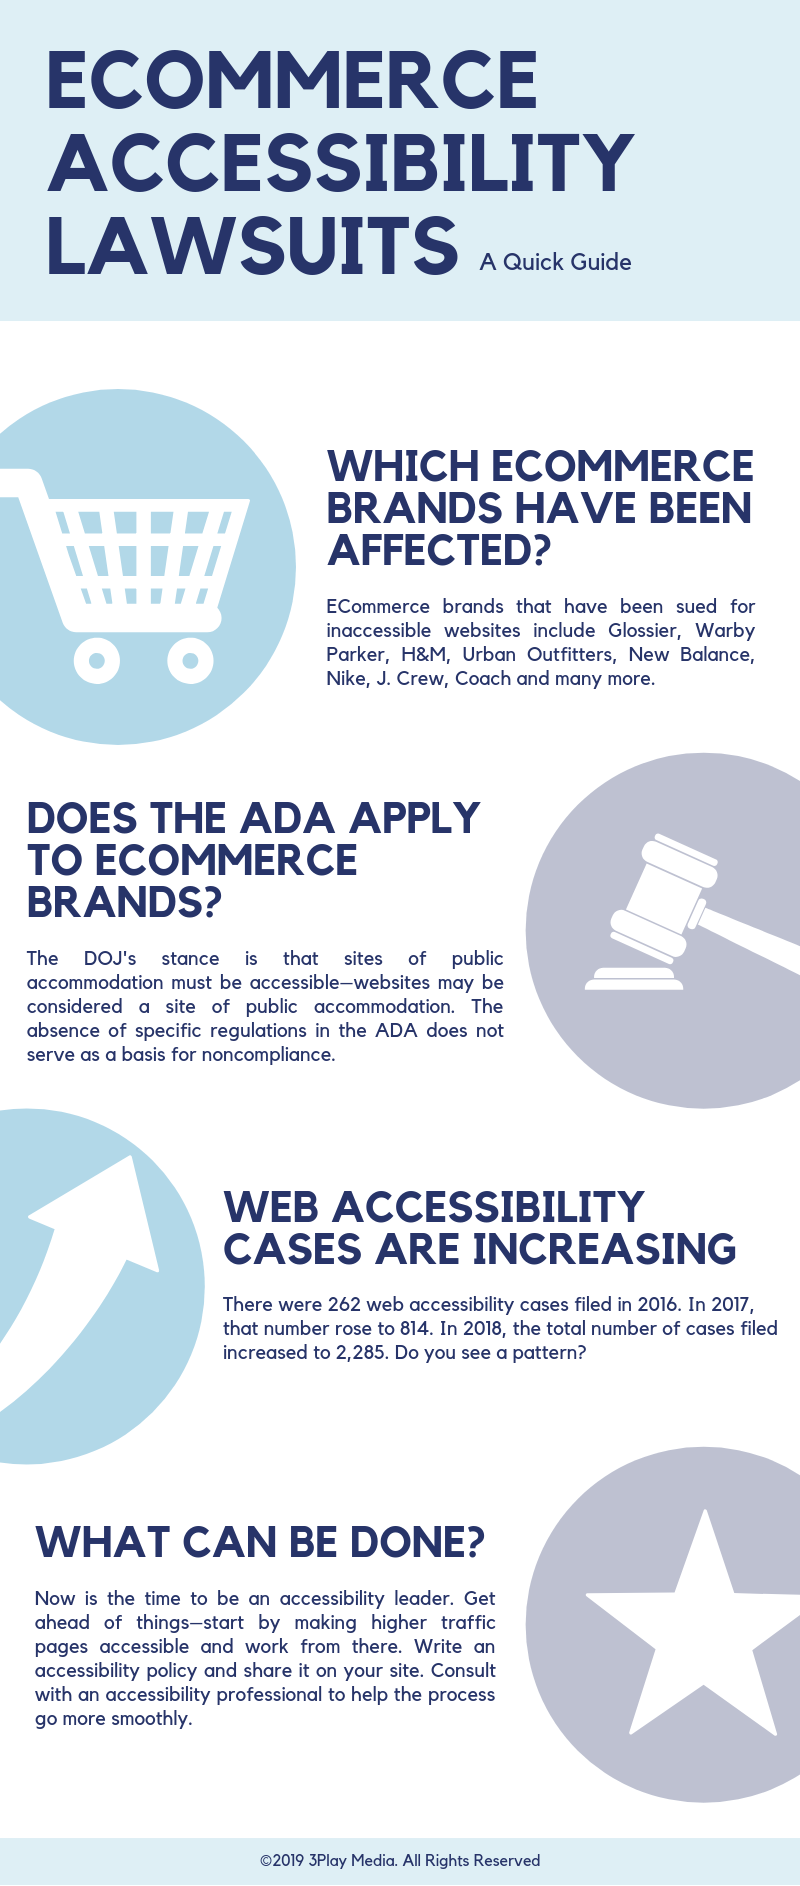 A quick guide to eCommerce accessibility lawsuits. The information in this infographic is also written throughout this blog post.